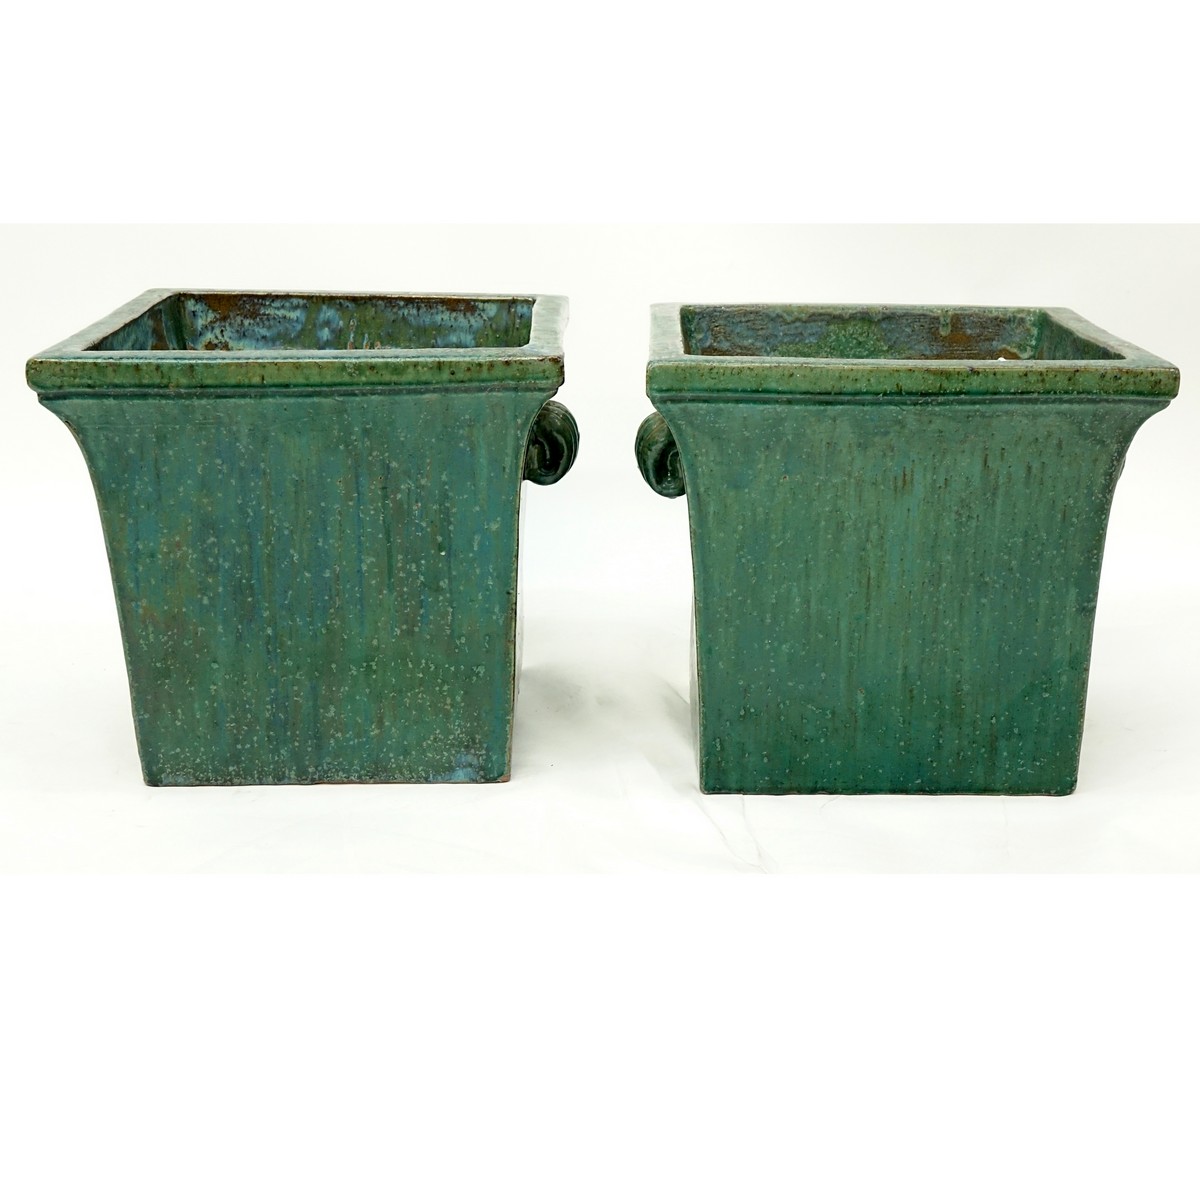 Pair of Large Chinese Style Green Glaze Pottery Jardinières with Mock Handles. Typical rubbing and spotting to glaze.